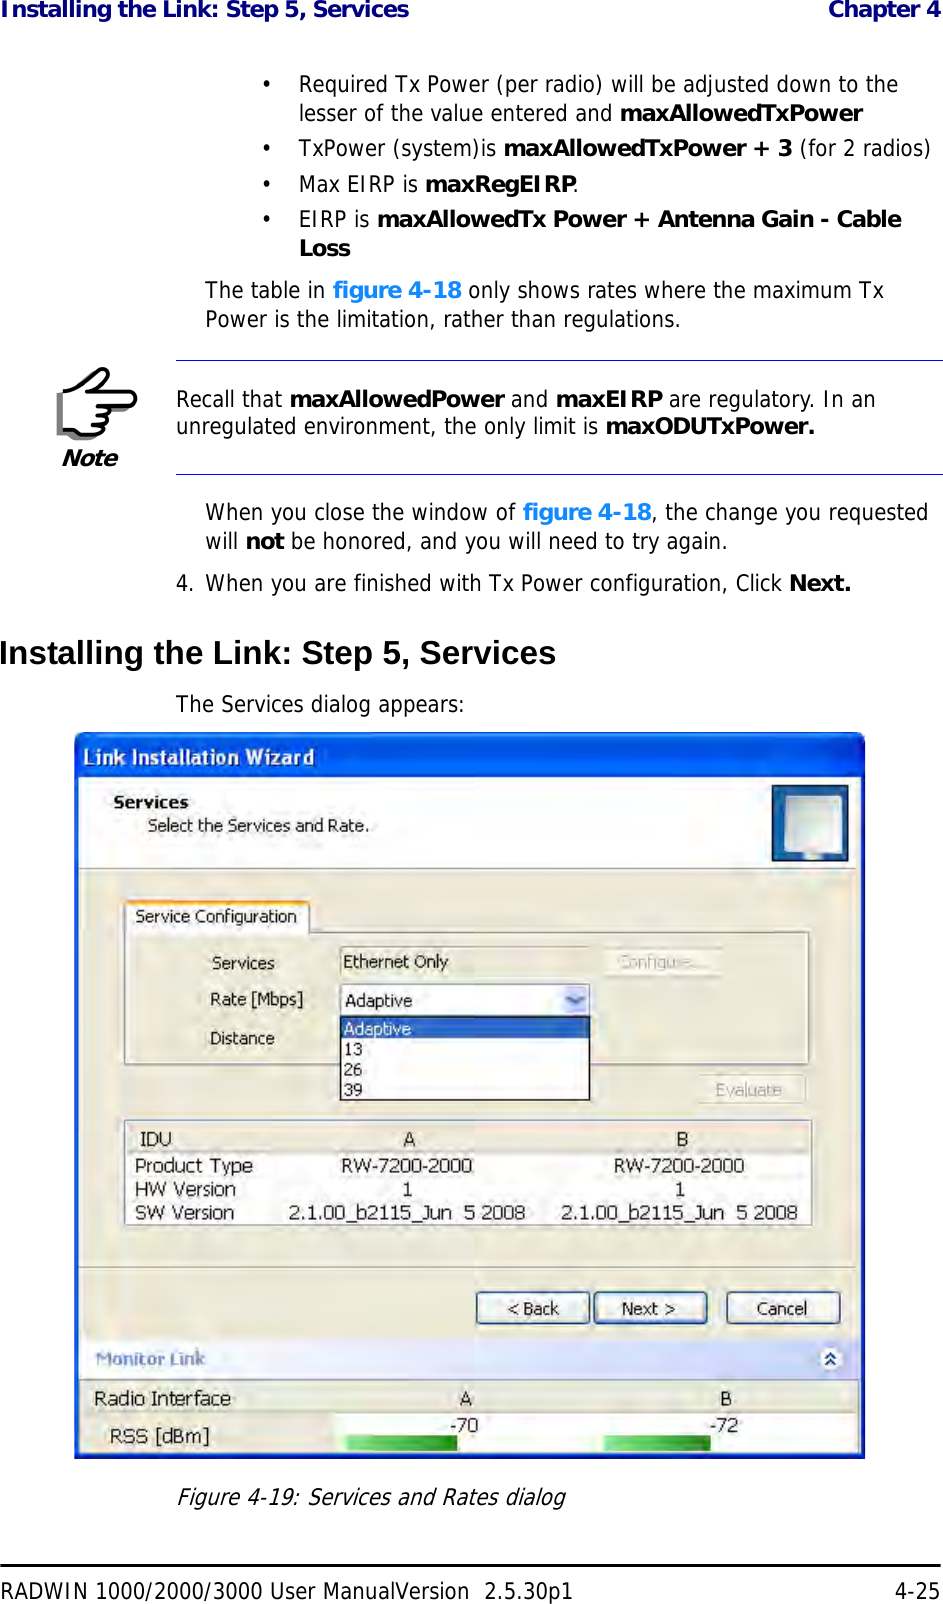 Installing the Link: Step 5, Services  Chapter 4RADWIN 1000/2000/3000 User ManualVersion  2.5.30p1 4-25• Required Tx Power (per radio) will be adjusted down to the lesser of the value entered and maxAllowedTxPower•TxPower (system)is maxAllowedTxPower + 3 (for 2 radios)•Max EIRP is maxRegEIRP.•EIRP is maxAllowedTx Power + Antenna Gain - Cable LossThe table in figure 4-18 only shows rates where the maximum Tx Power is the limitation, rather than regulations.When you close the window of figure 4-18, the change you requested will not be honored, and you will need to try again.4. When you are finished with Tx Power configuration, Click Next.Installing the Link: Step 5, ServicesThe Services dialog appears:Figure 4-19: Services and Rates dialogNoteRecall that maxAllowedPower and maxEIRP are regulatory. In an unregulated environment, the only limit is maxODUTxPower.